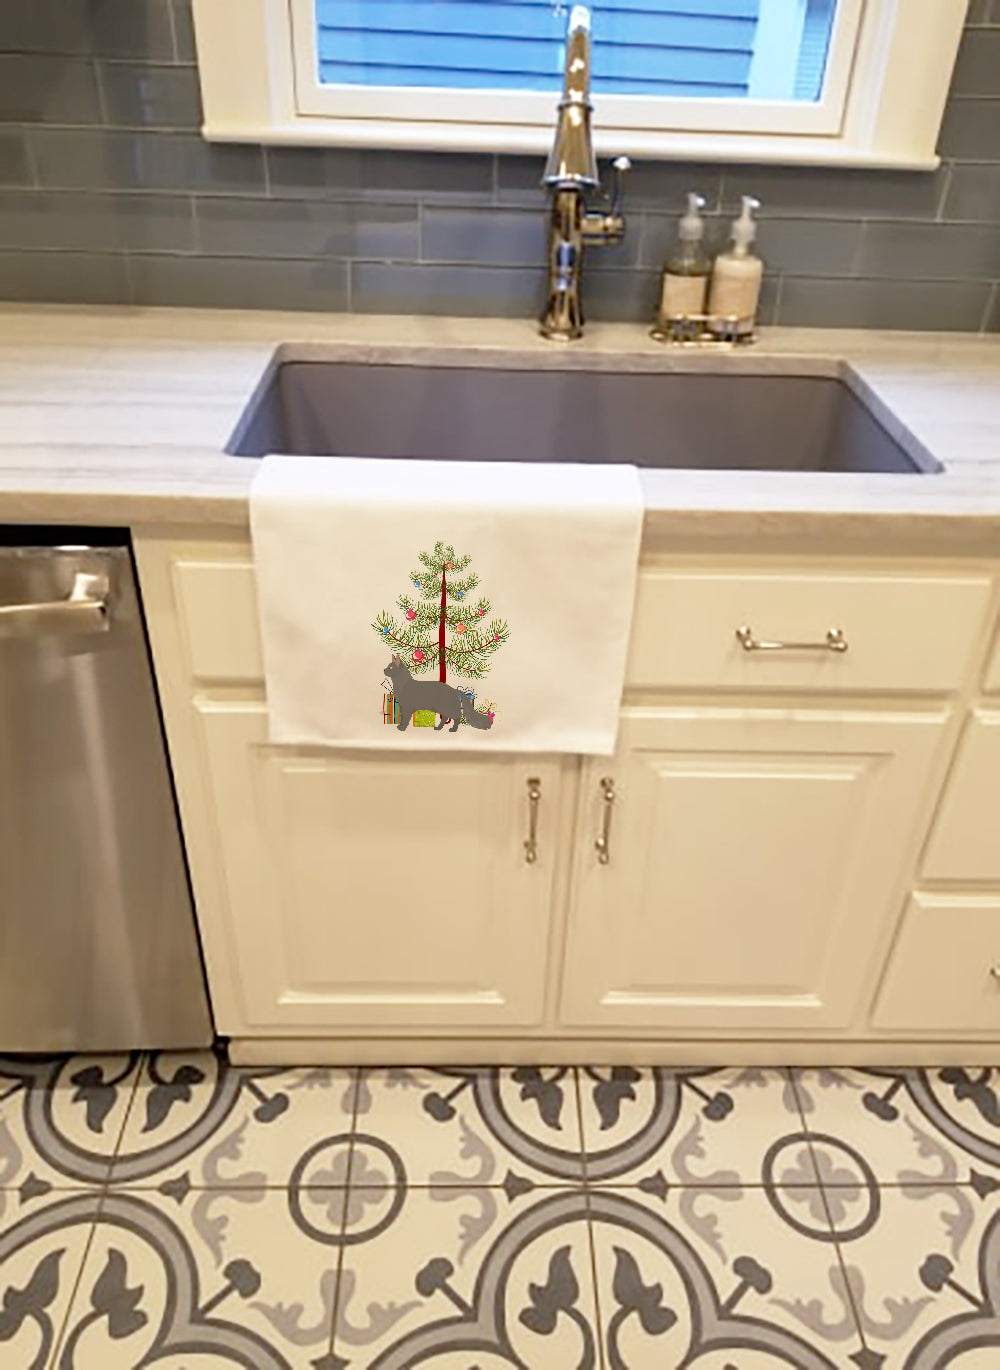 Buy this Nebelung #2 Cat Merry Christmas White Kitchen Towel Set of 2